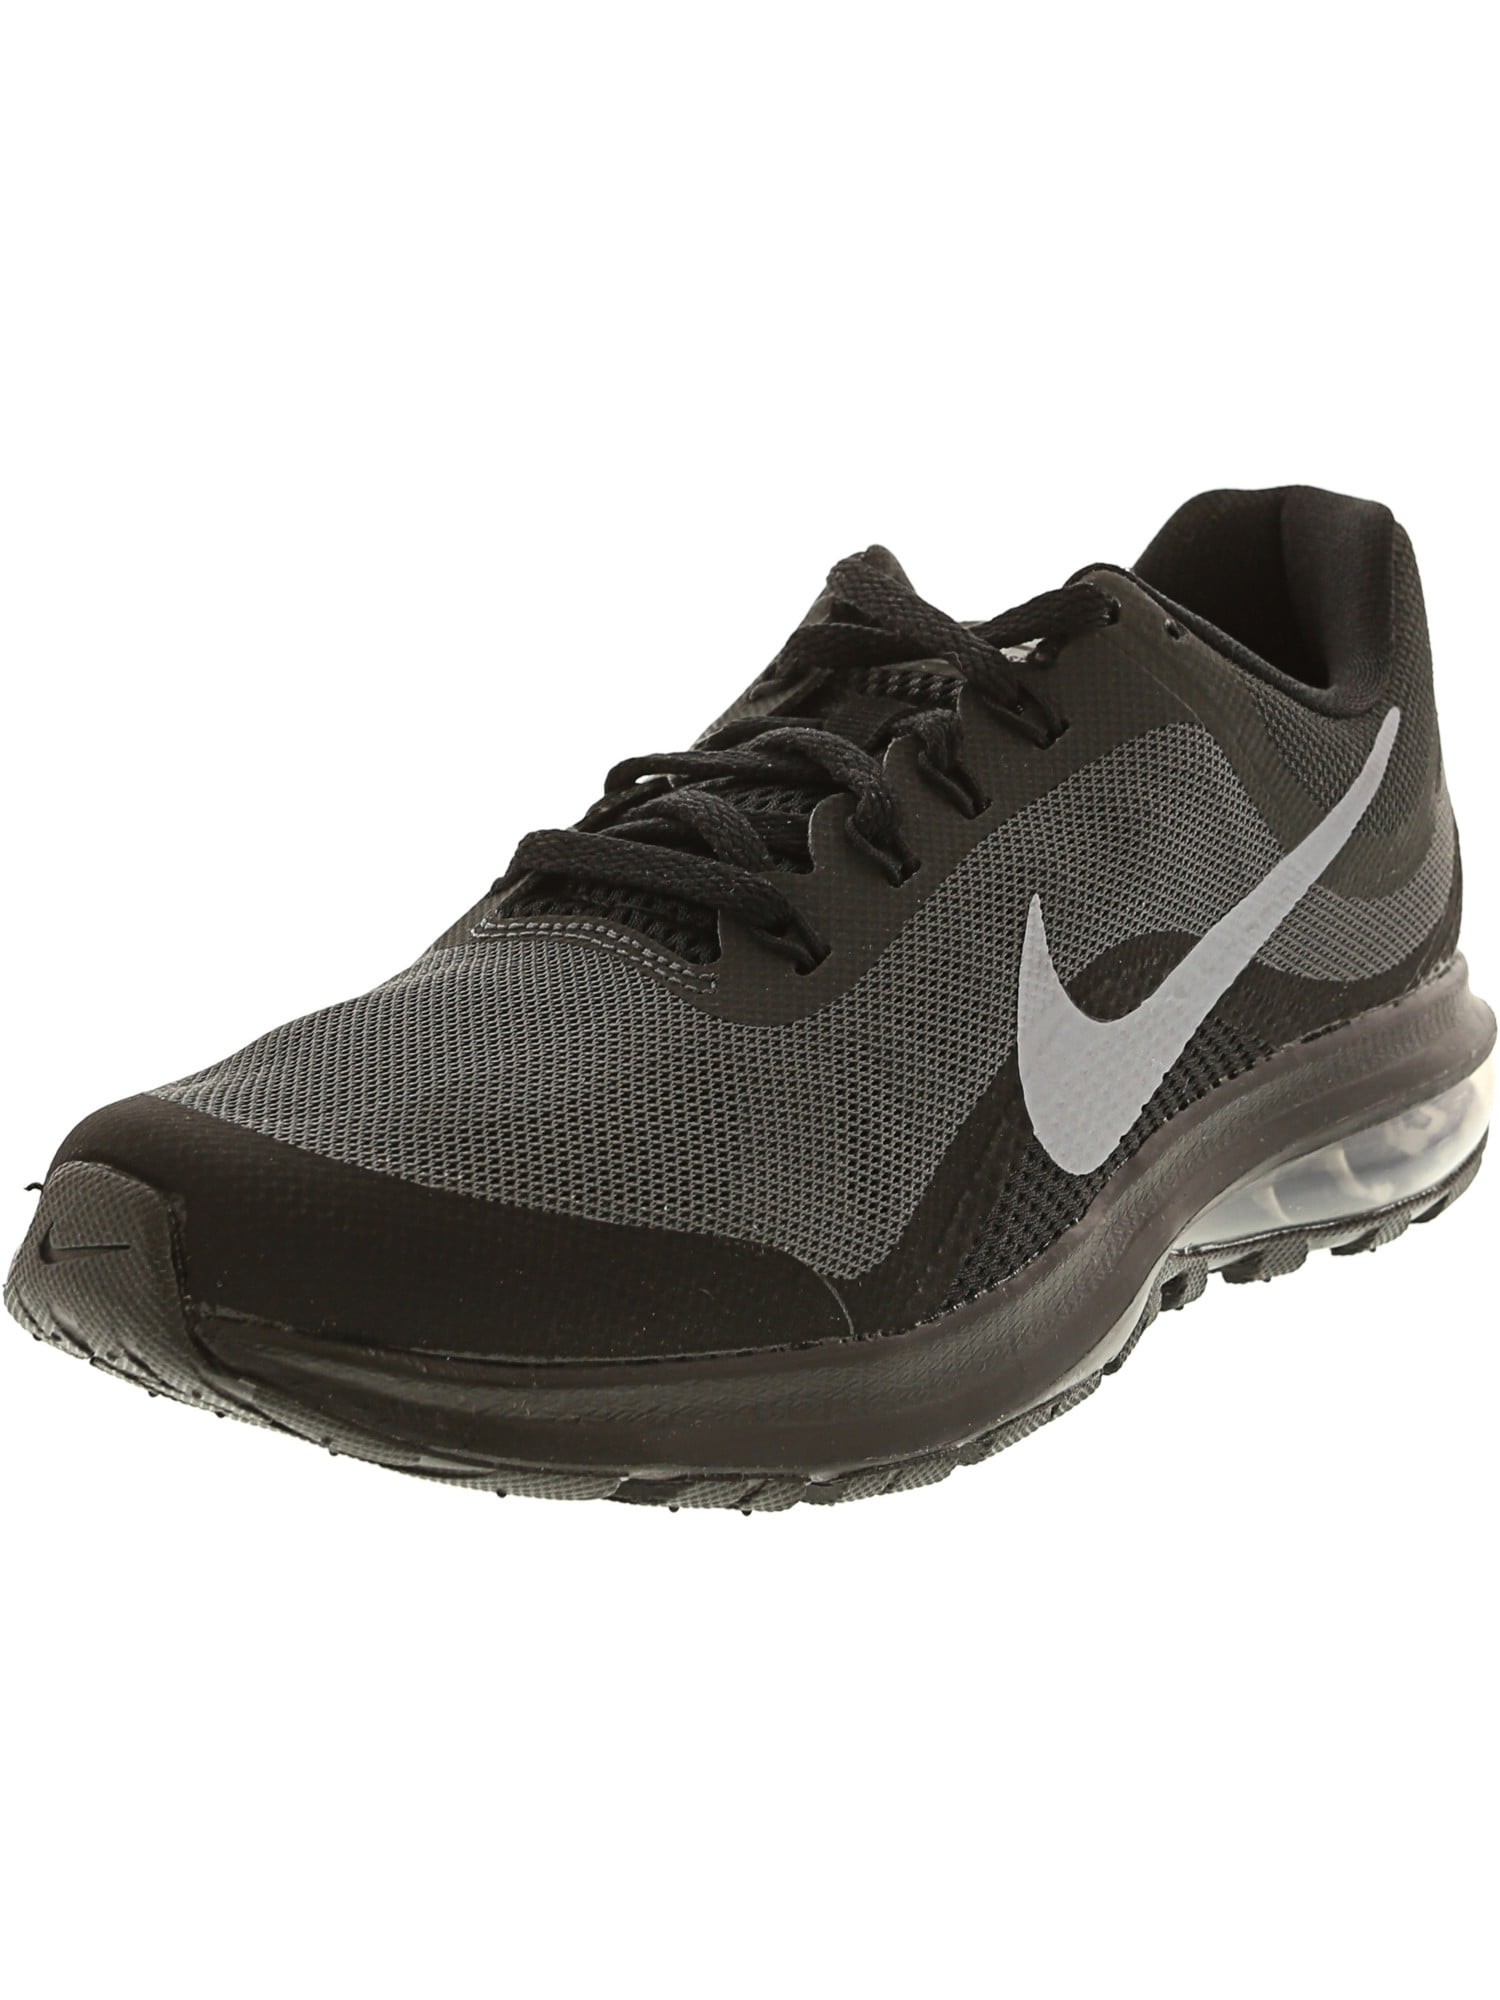 Nike Women's Air Max Dynasty 2 Anthracite / Metallic Cool Grey Ankle ...